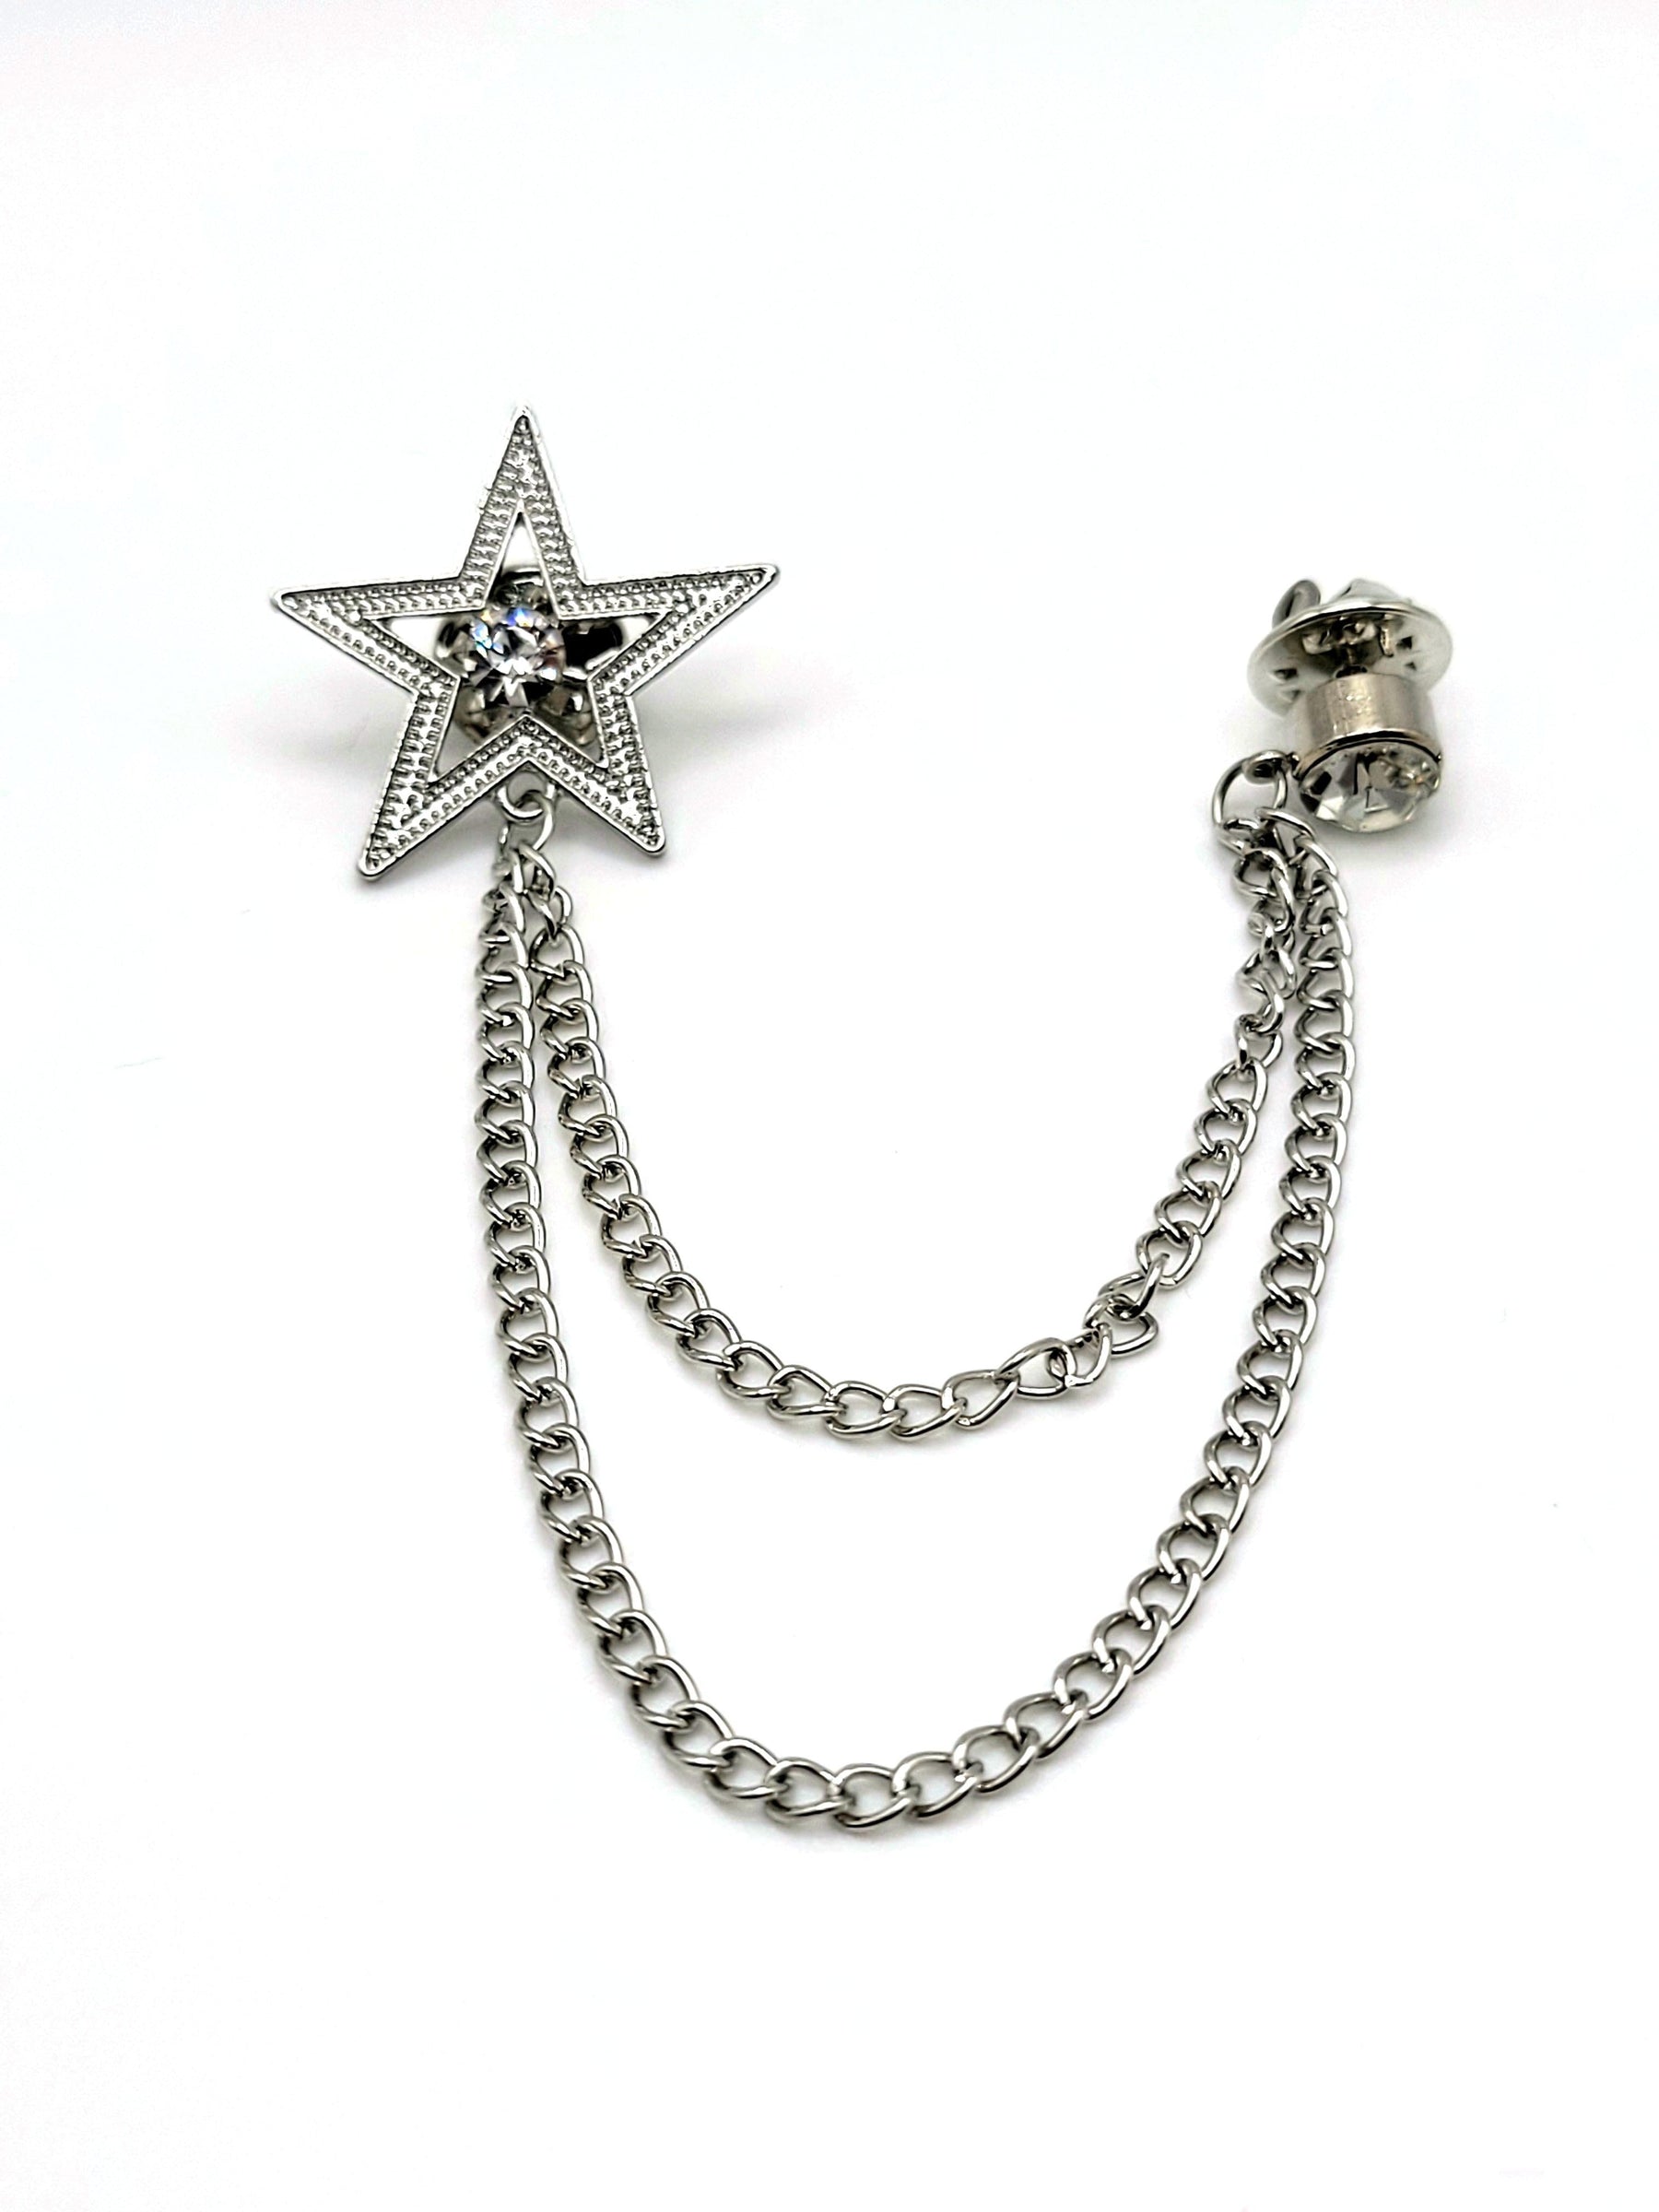 Star Lapel Chain - The Upscale Banker